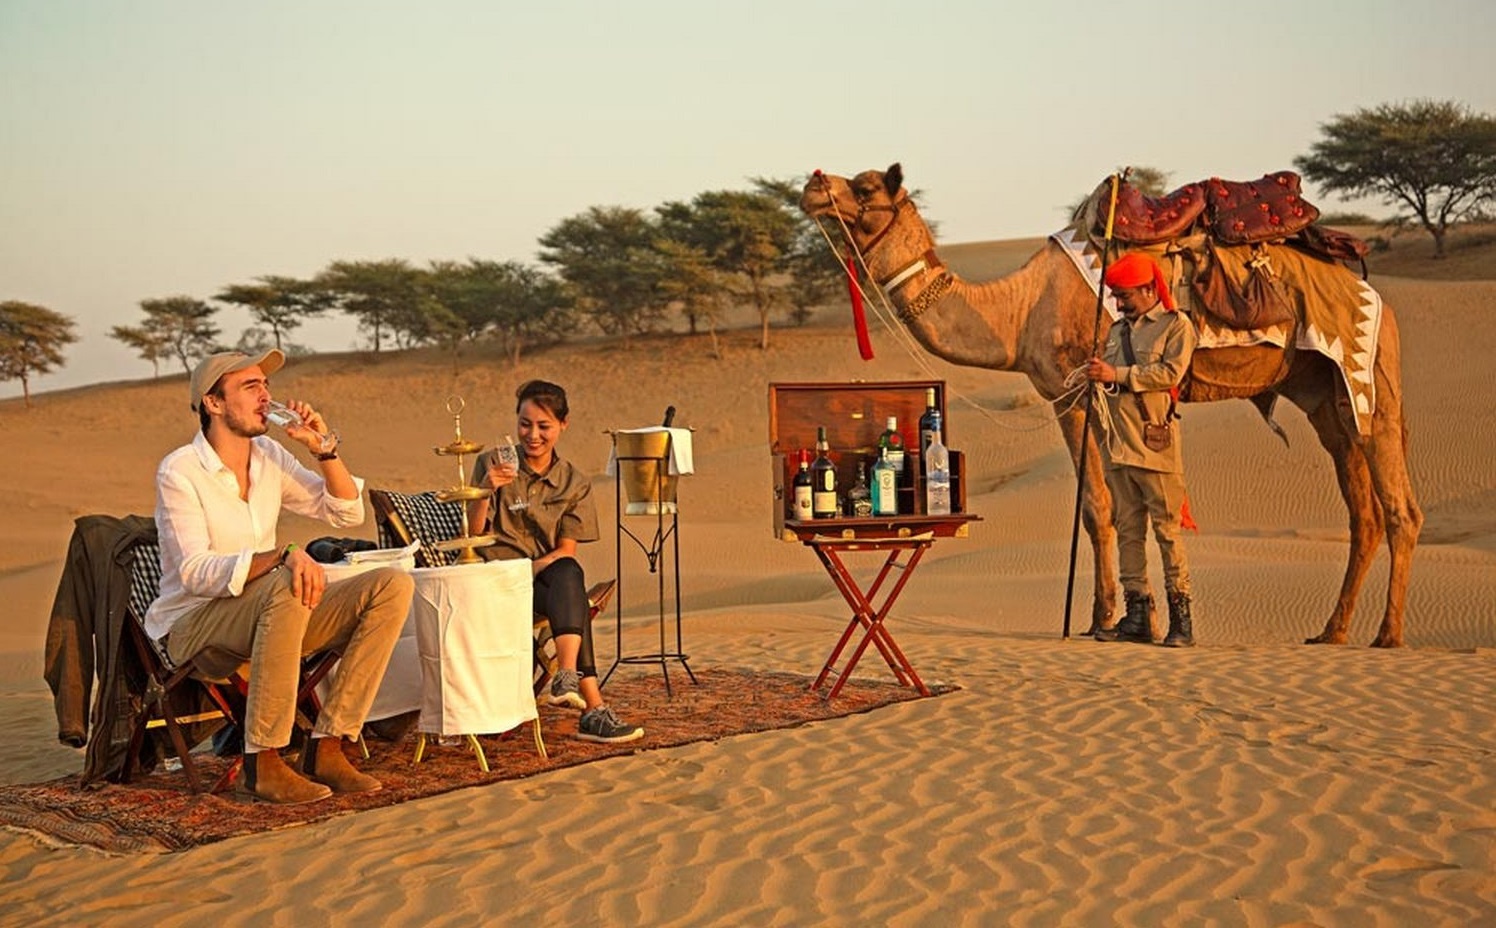 Desert Safaris: Experiences and Attractions